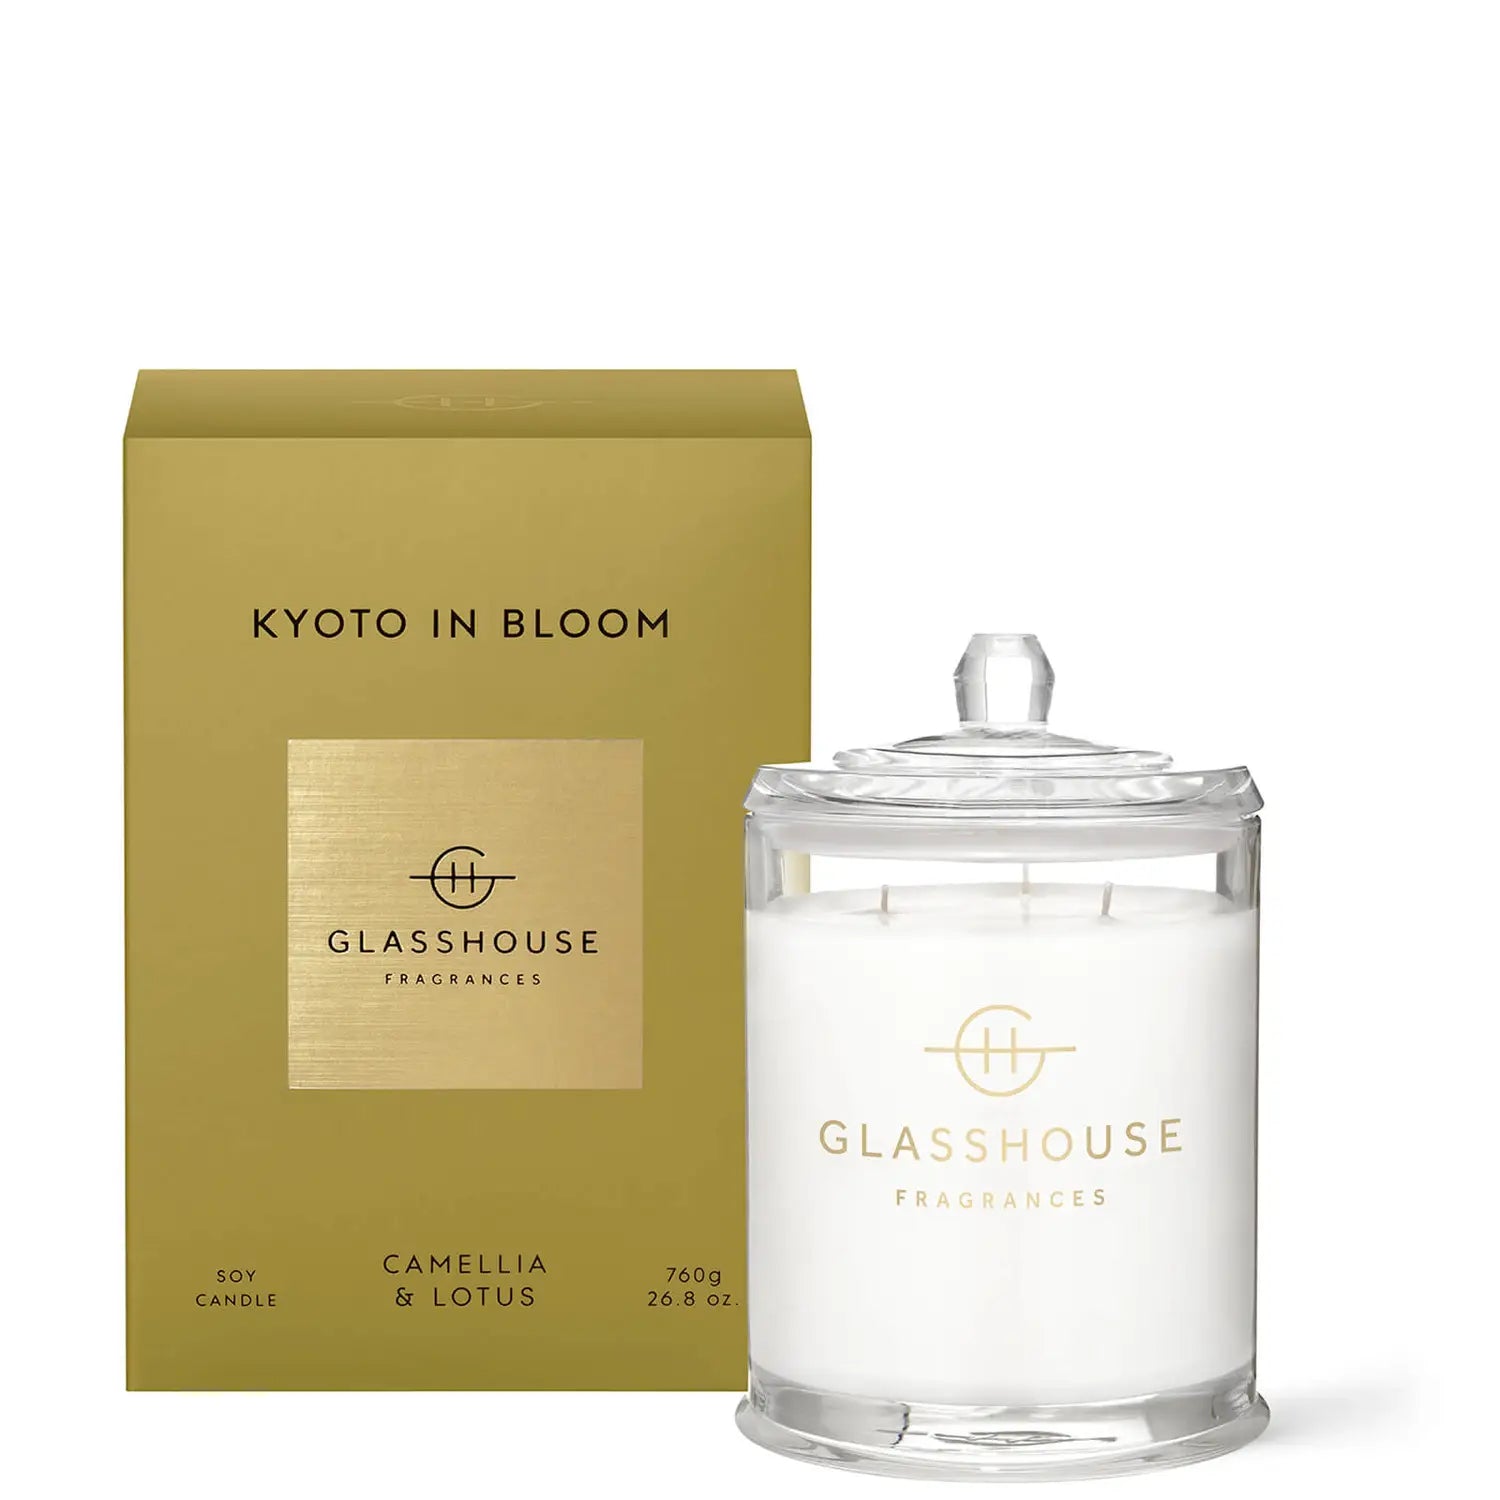 GLASSHOUSE | KYOTO IN BLOOM - 760G CANDLE